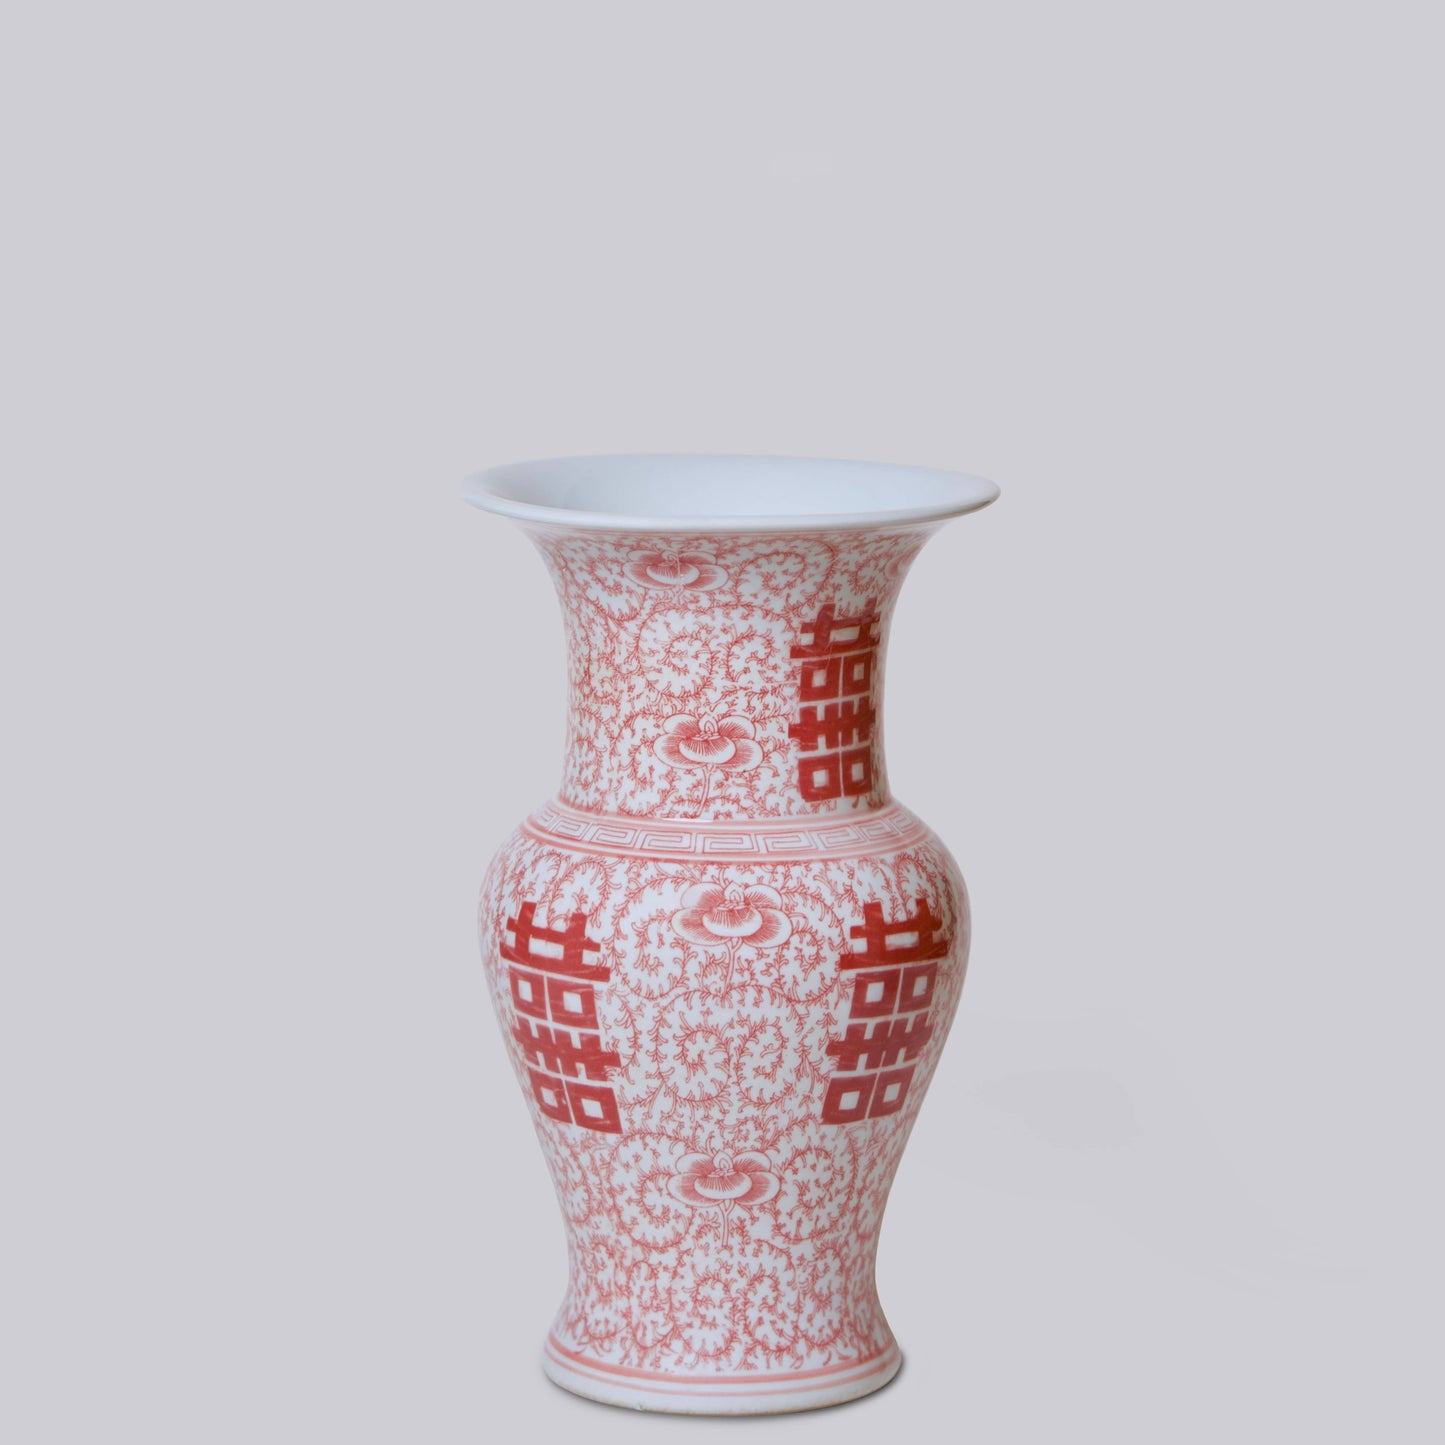 Double Happiness Red & White Porcelain Trumpet Vase